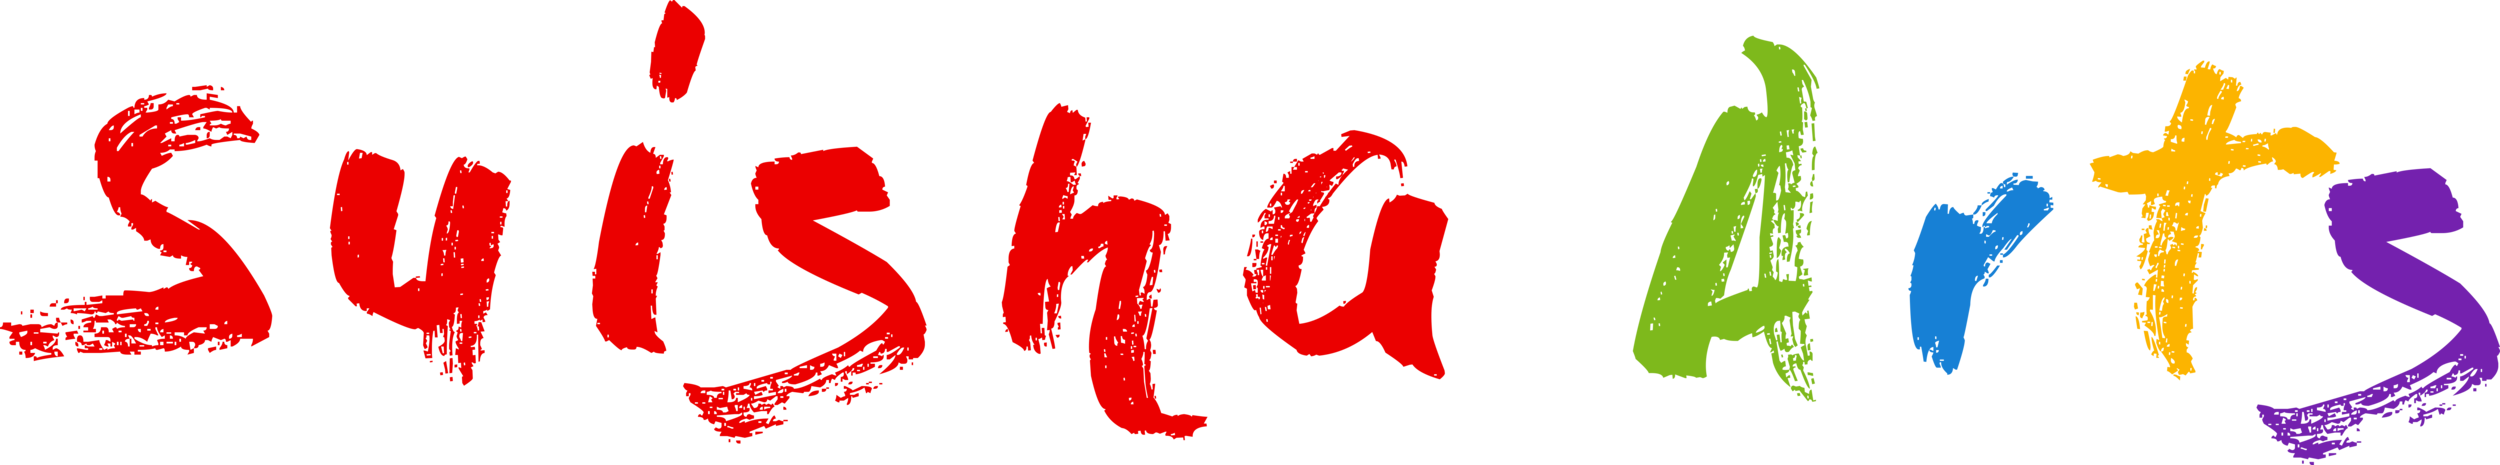 THE OFFICAL LOGO OF SUISHA.png